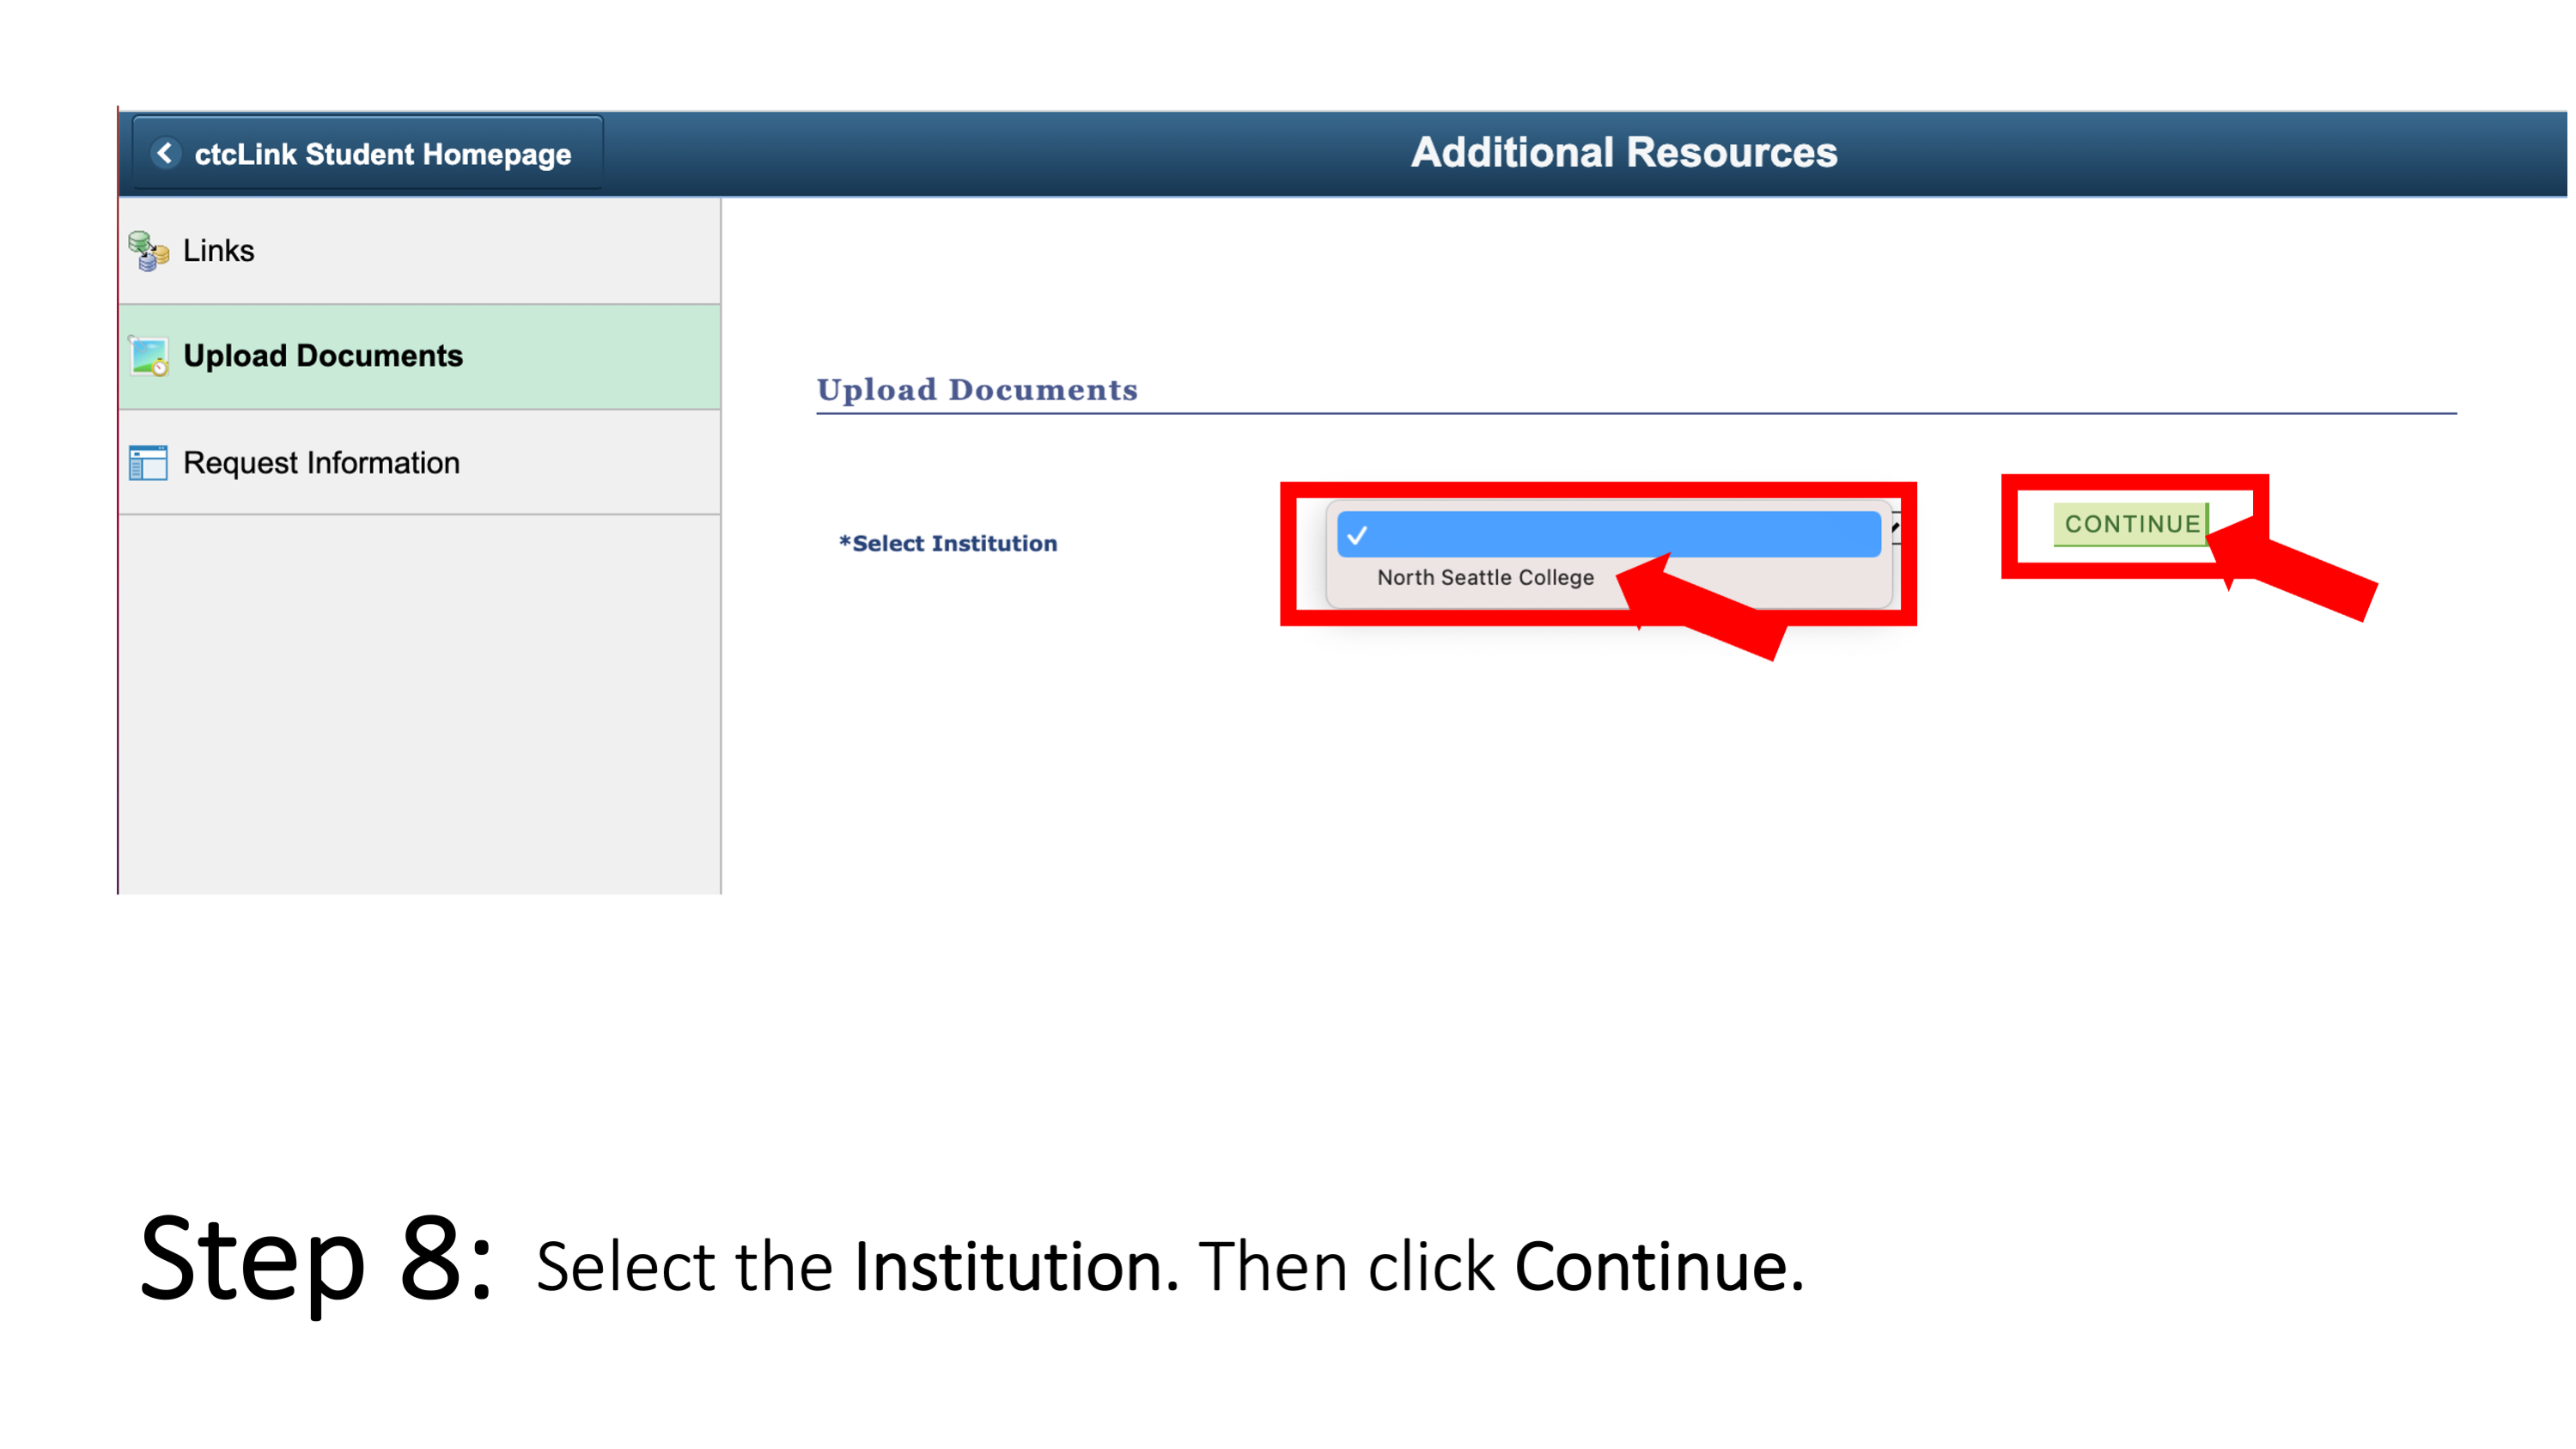 Step 8: Select the Institution. Then click Continue. 